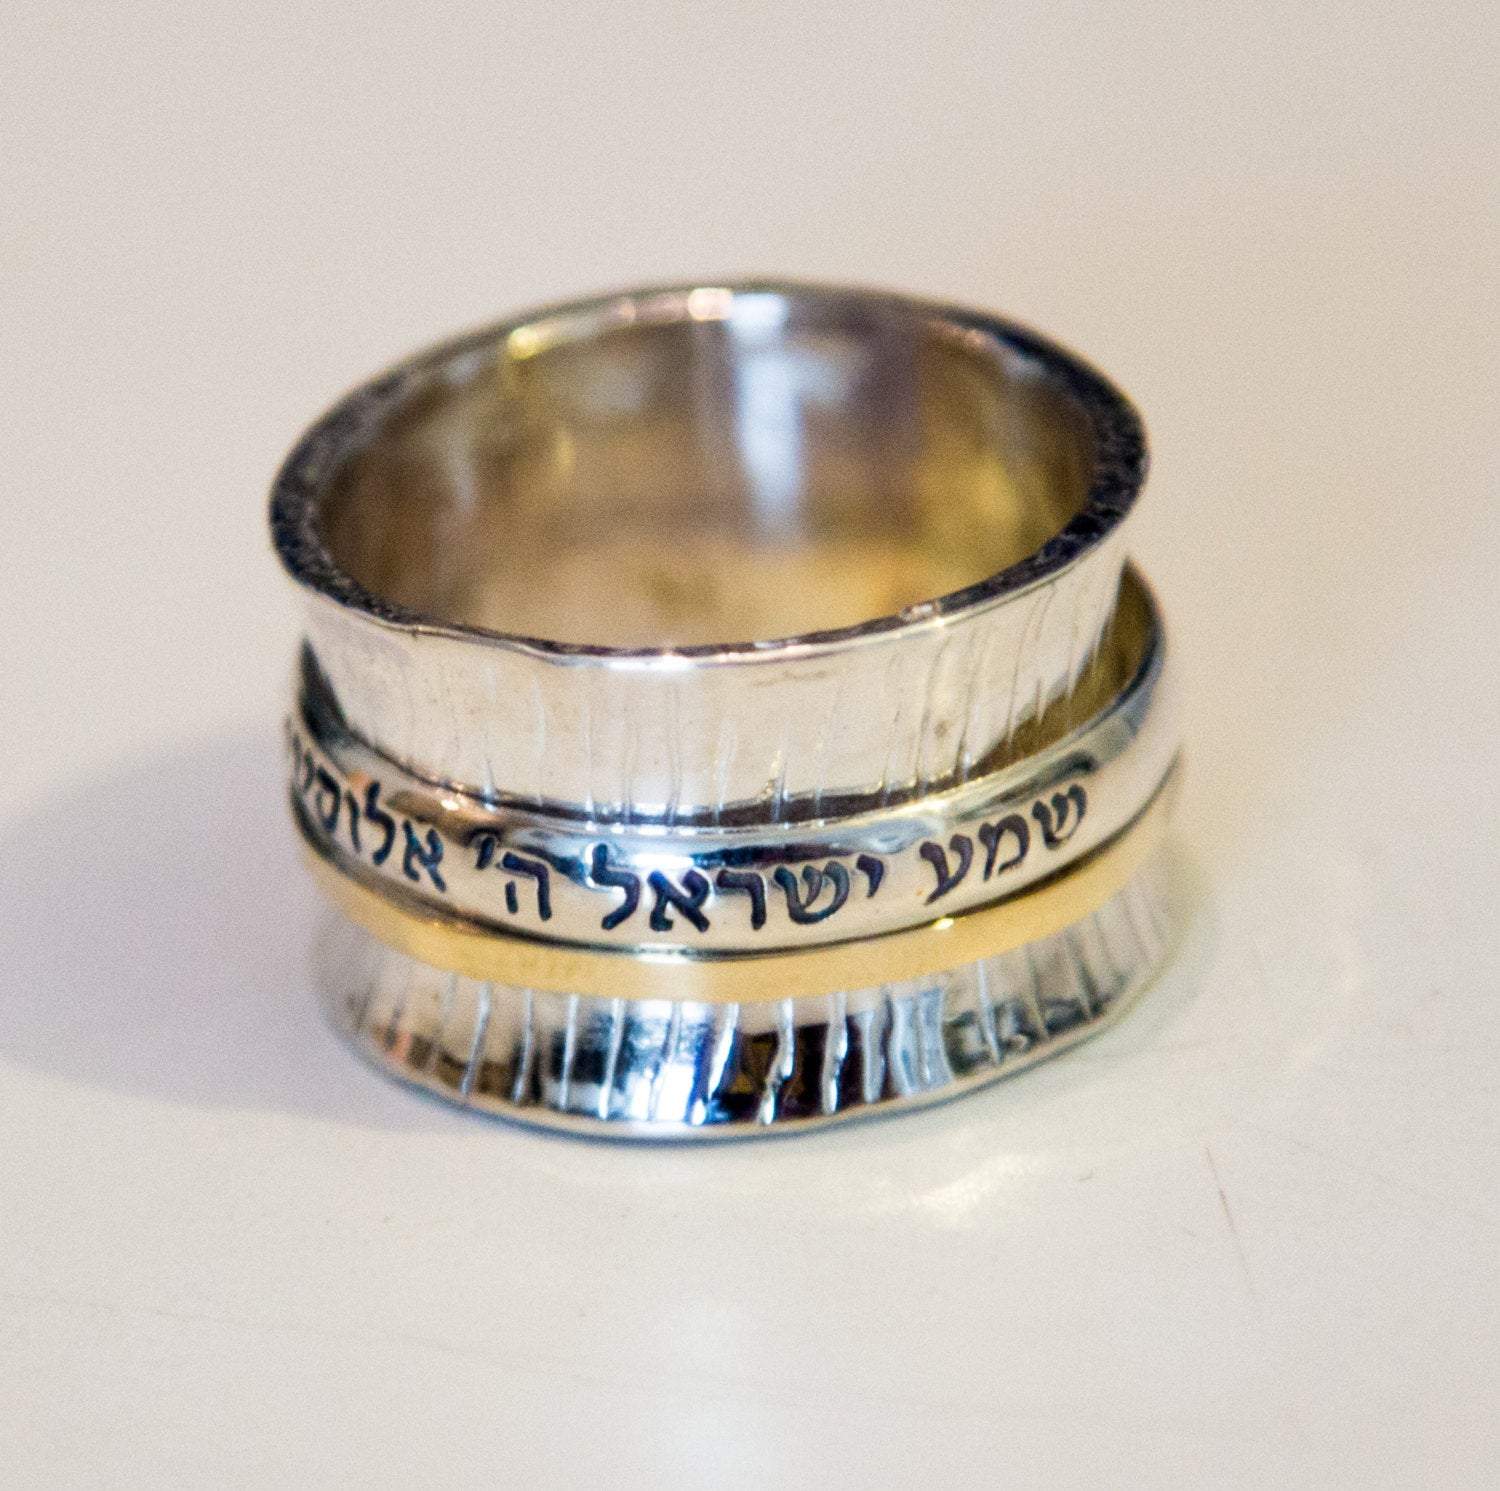 Bluenoemi Jewelry Personalized Rings Meditation Ring. Blessing Rings. Silver & gold Israeli Ring.